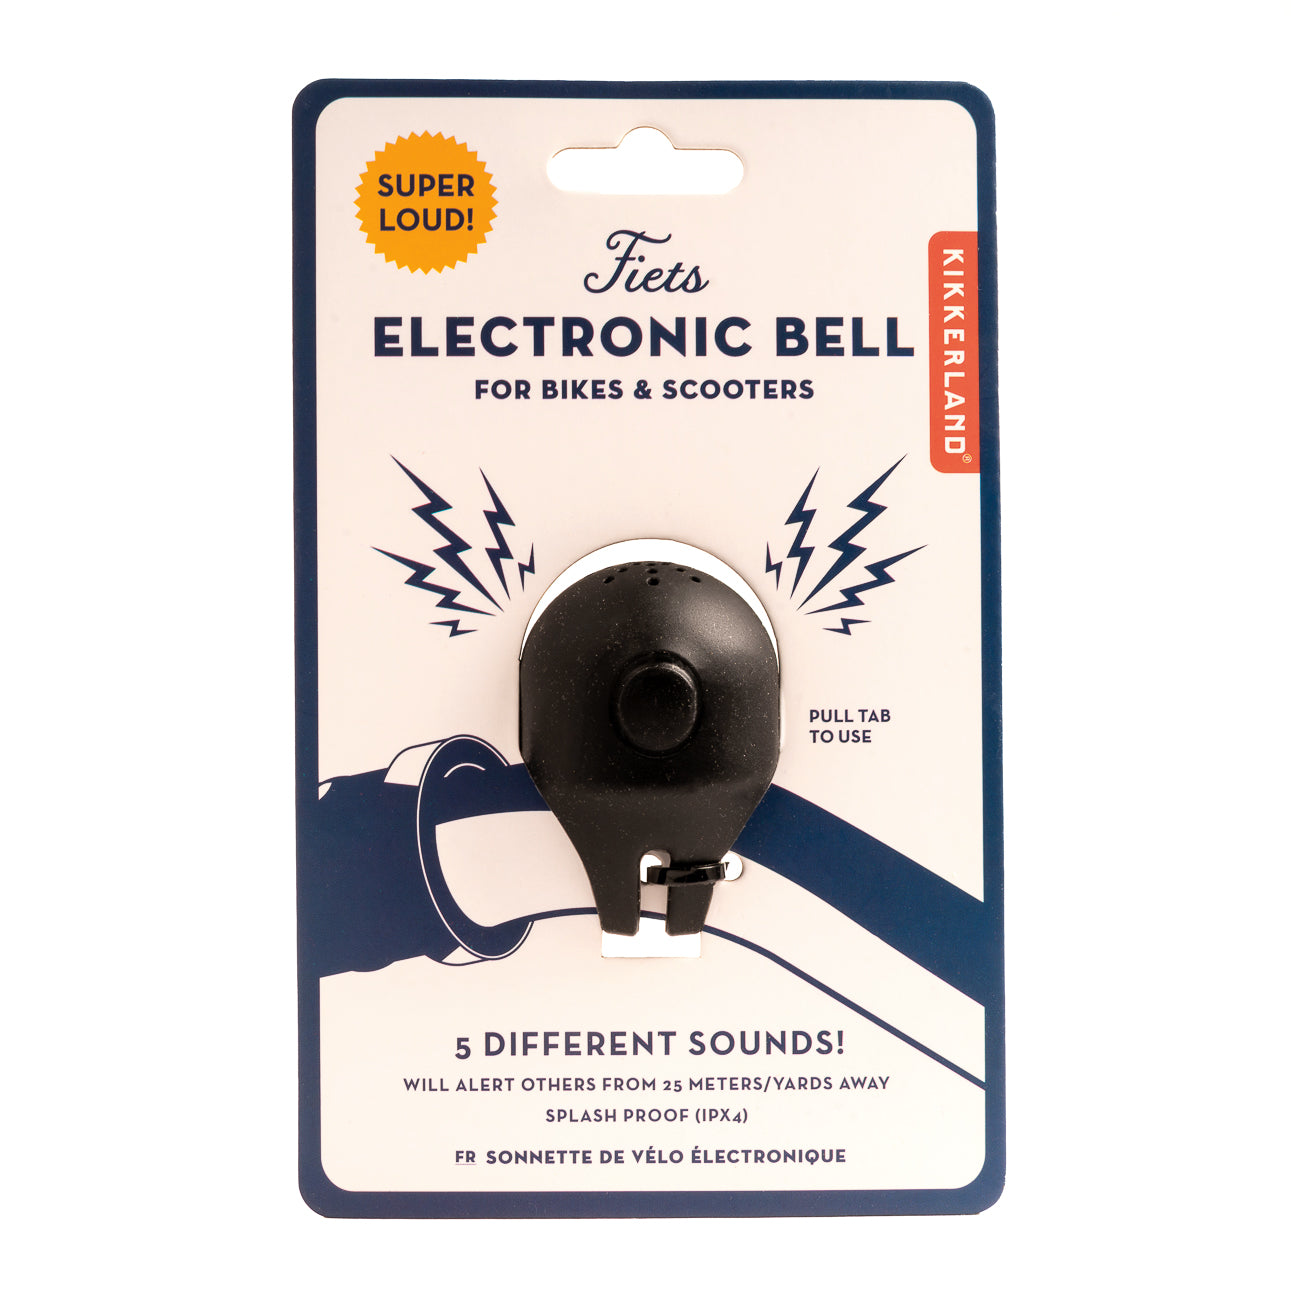 Electronic Bell